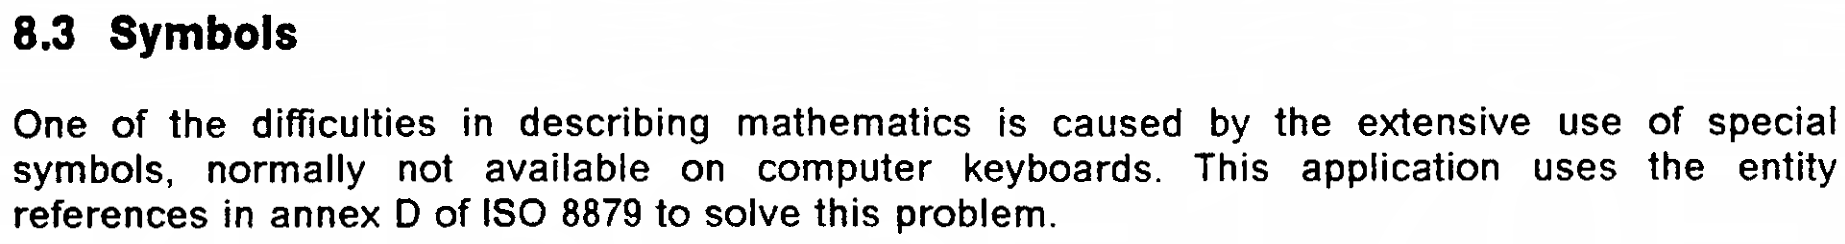 8.3 Symbols

One of the difficulties in describing mathematics is caused by the extensive use of special
symbols, normally not available on computer keyboards. This application uses the entity references in annex D of ISO 8879 to solve this problem.